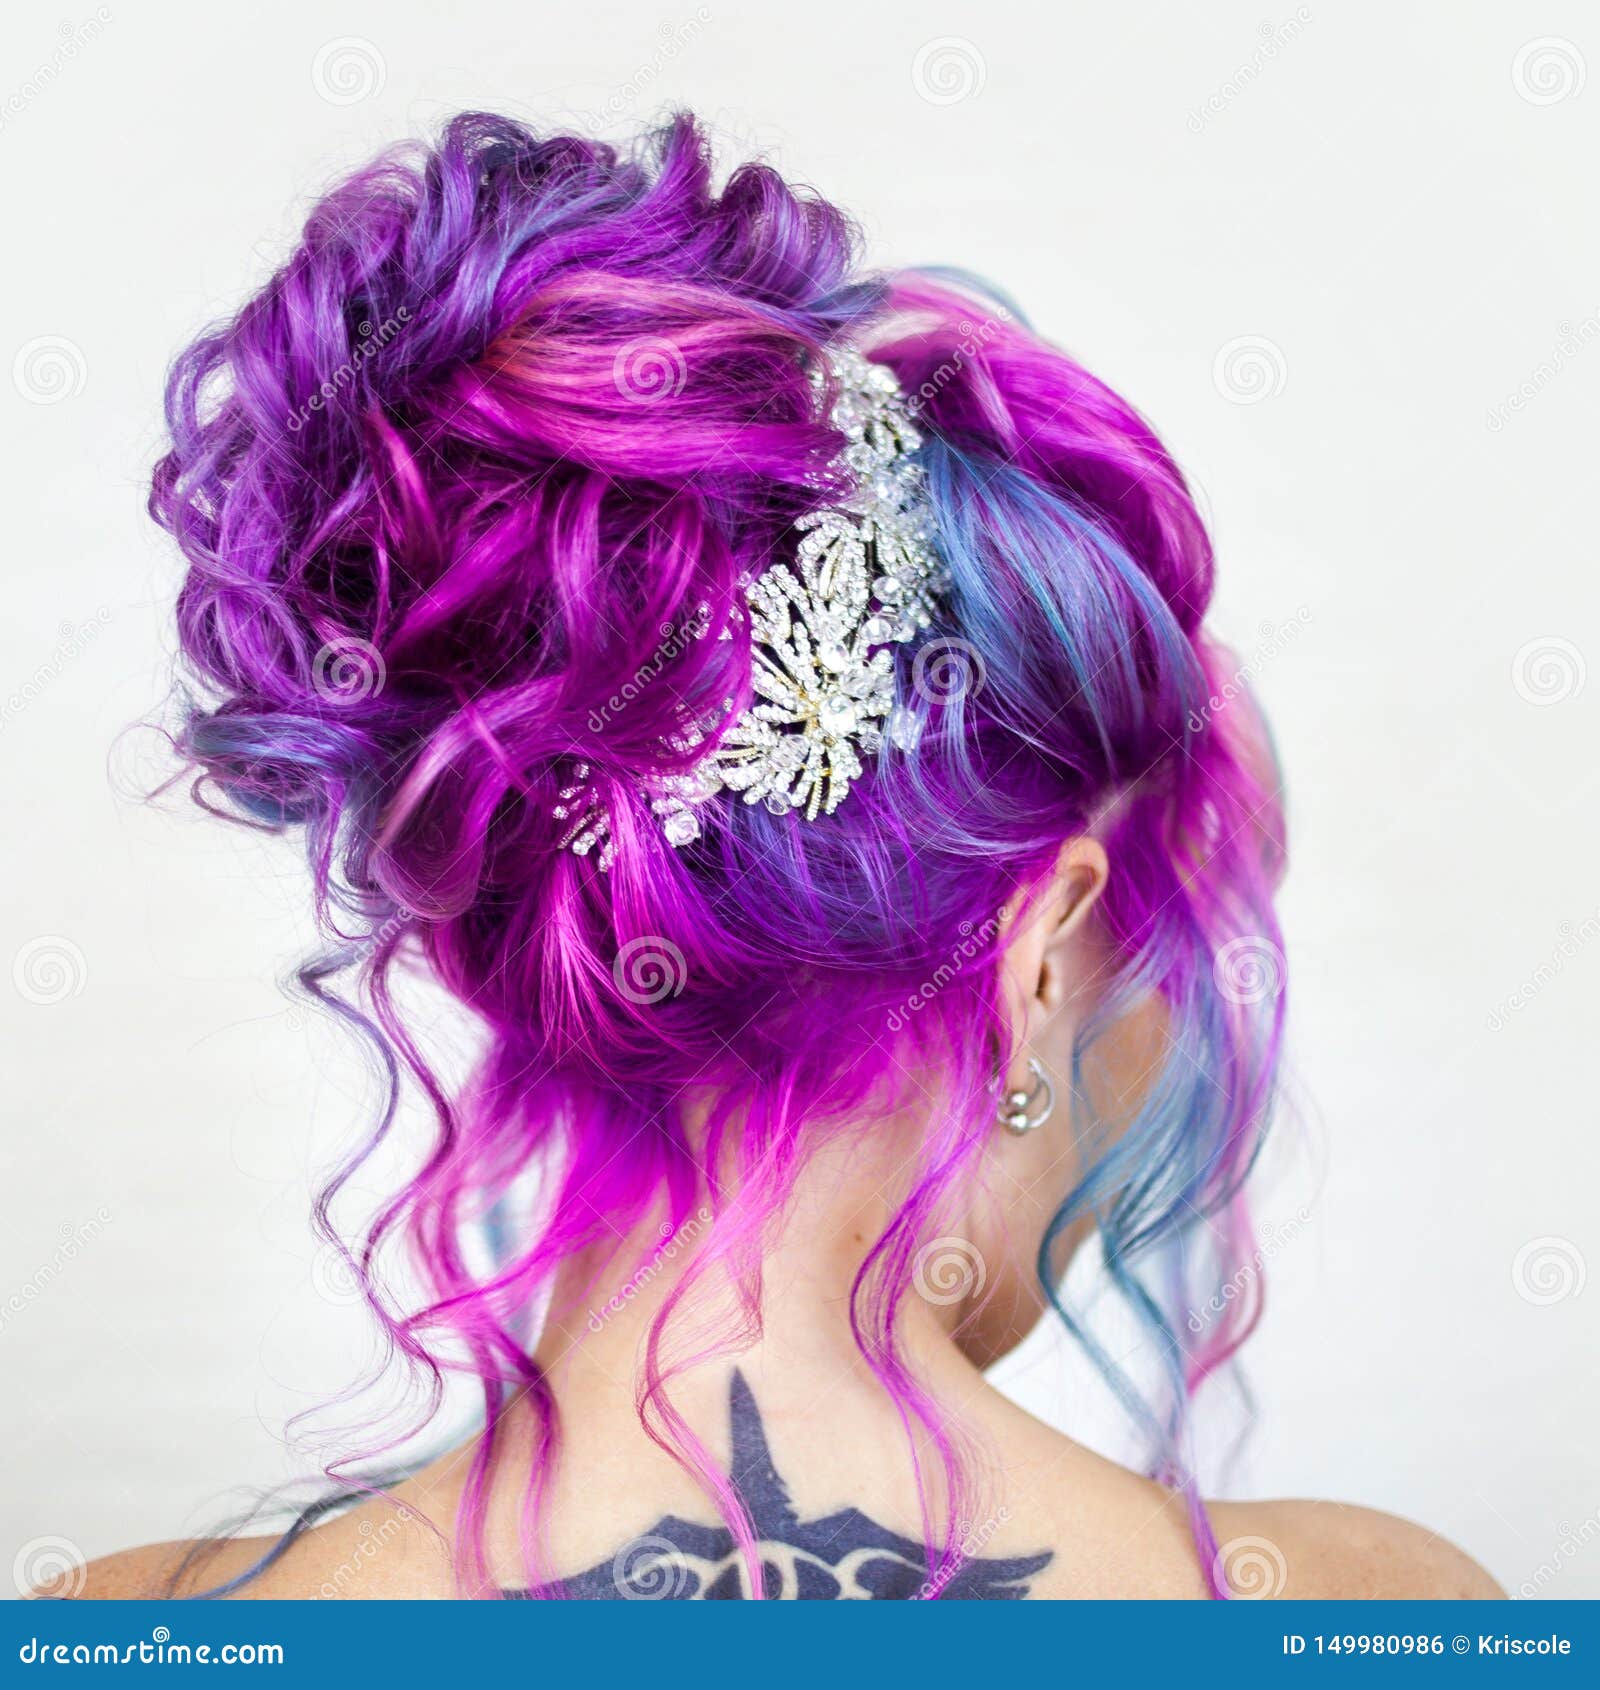 Incredible Hair Color, Bright Blue and Magenta Gradient. Stylish  Fashionable Hair Coloring Stock Photo - Image of hairpin, curls: 149980986